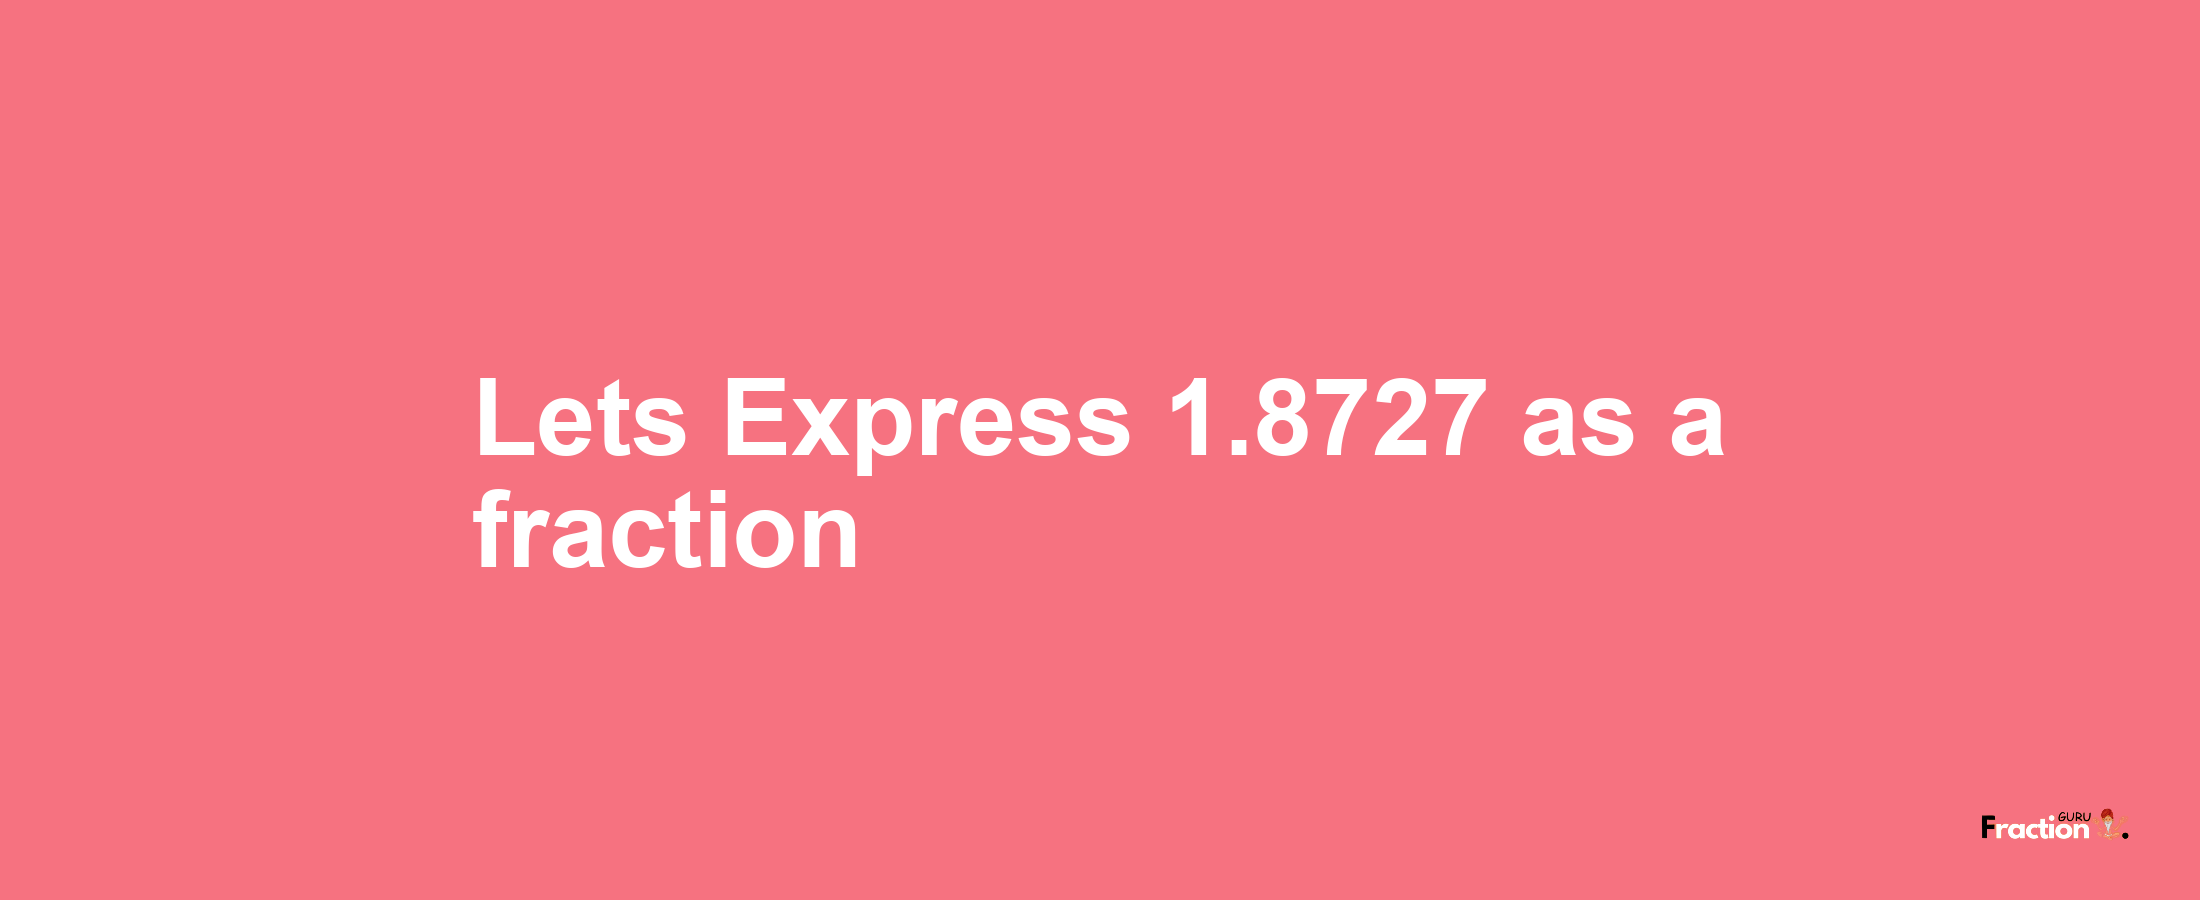 Lets Express 1.8727 as afraction